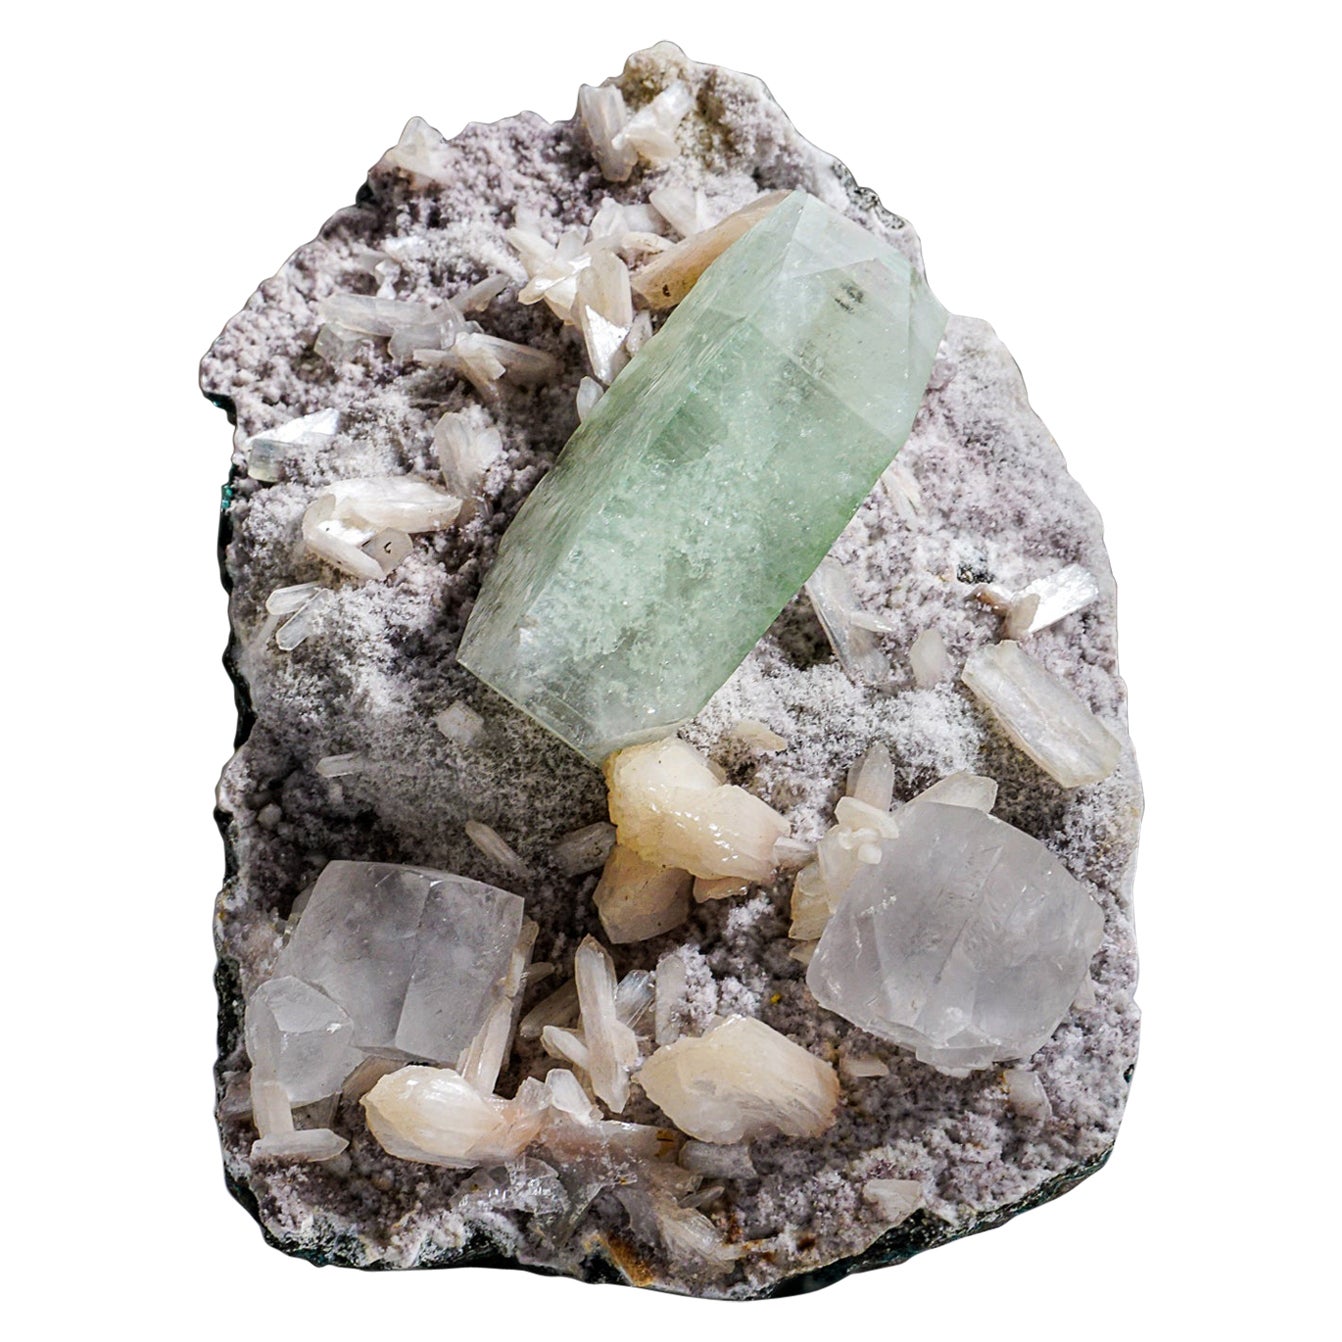 Green Apophyllite with Gem Calcite and Stilbite from Pune District, India